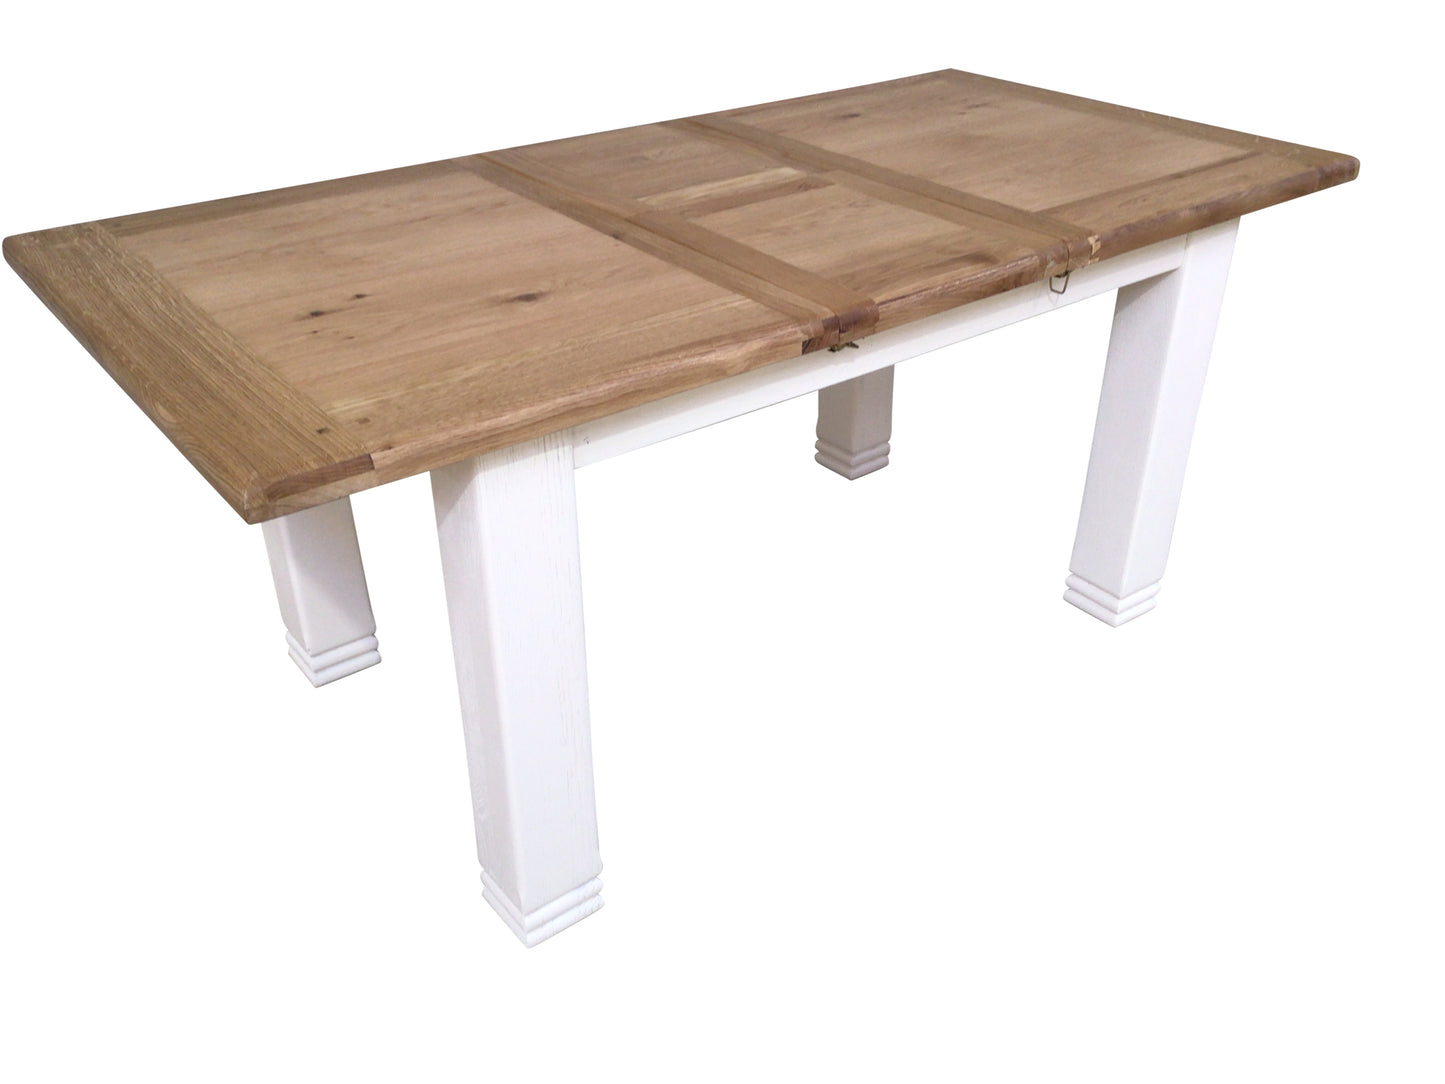 Danube Oak 1.4m Extension Dining Set painted Off-White